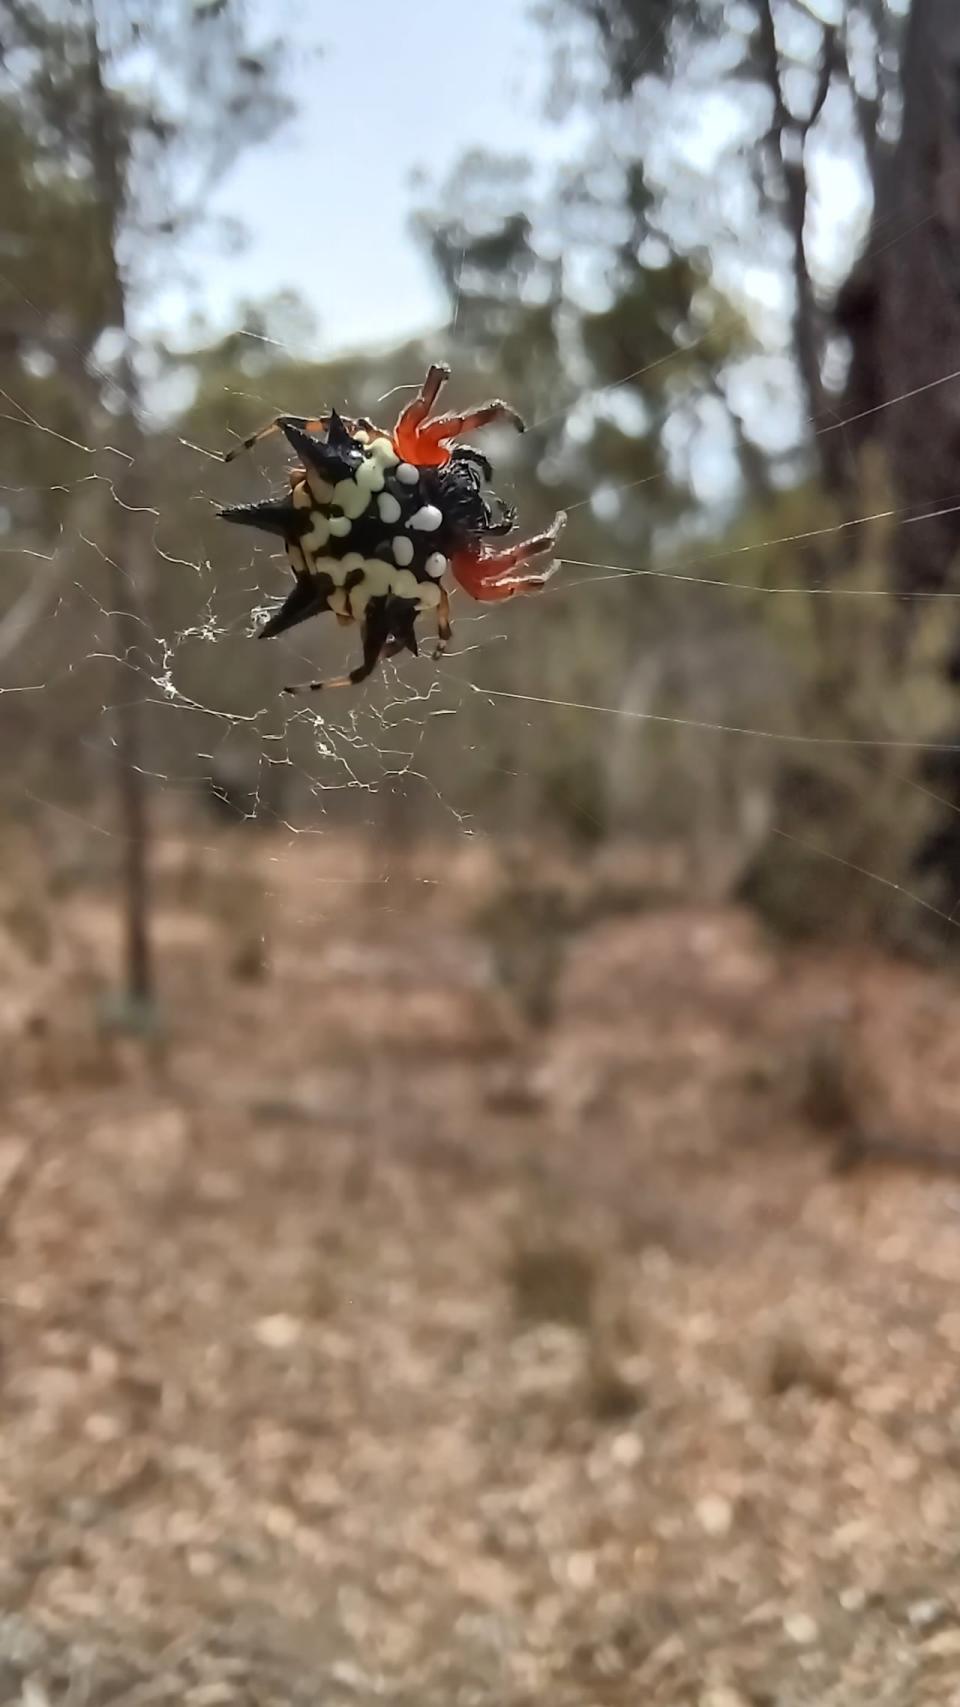 An Austracantha minax  spider spins a web at the Karakamia Sanctuary, a wildlife reserve in Australia where researchers conducted a study on environmental DNA,